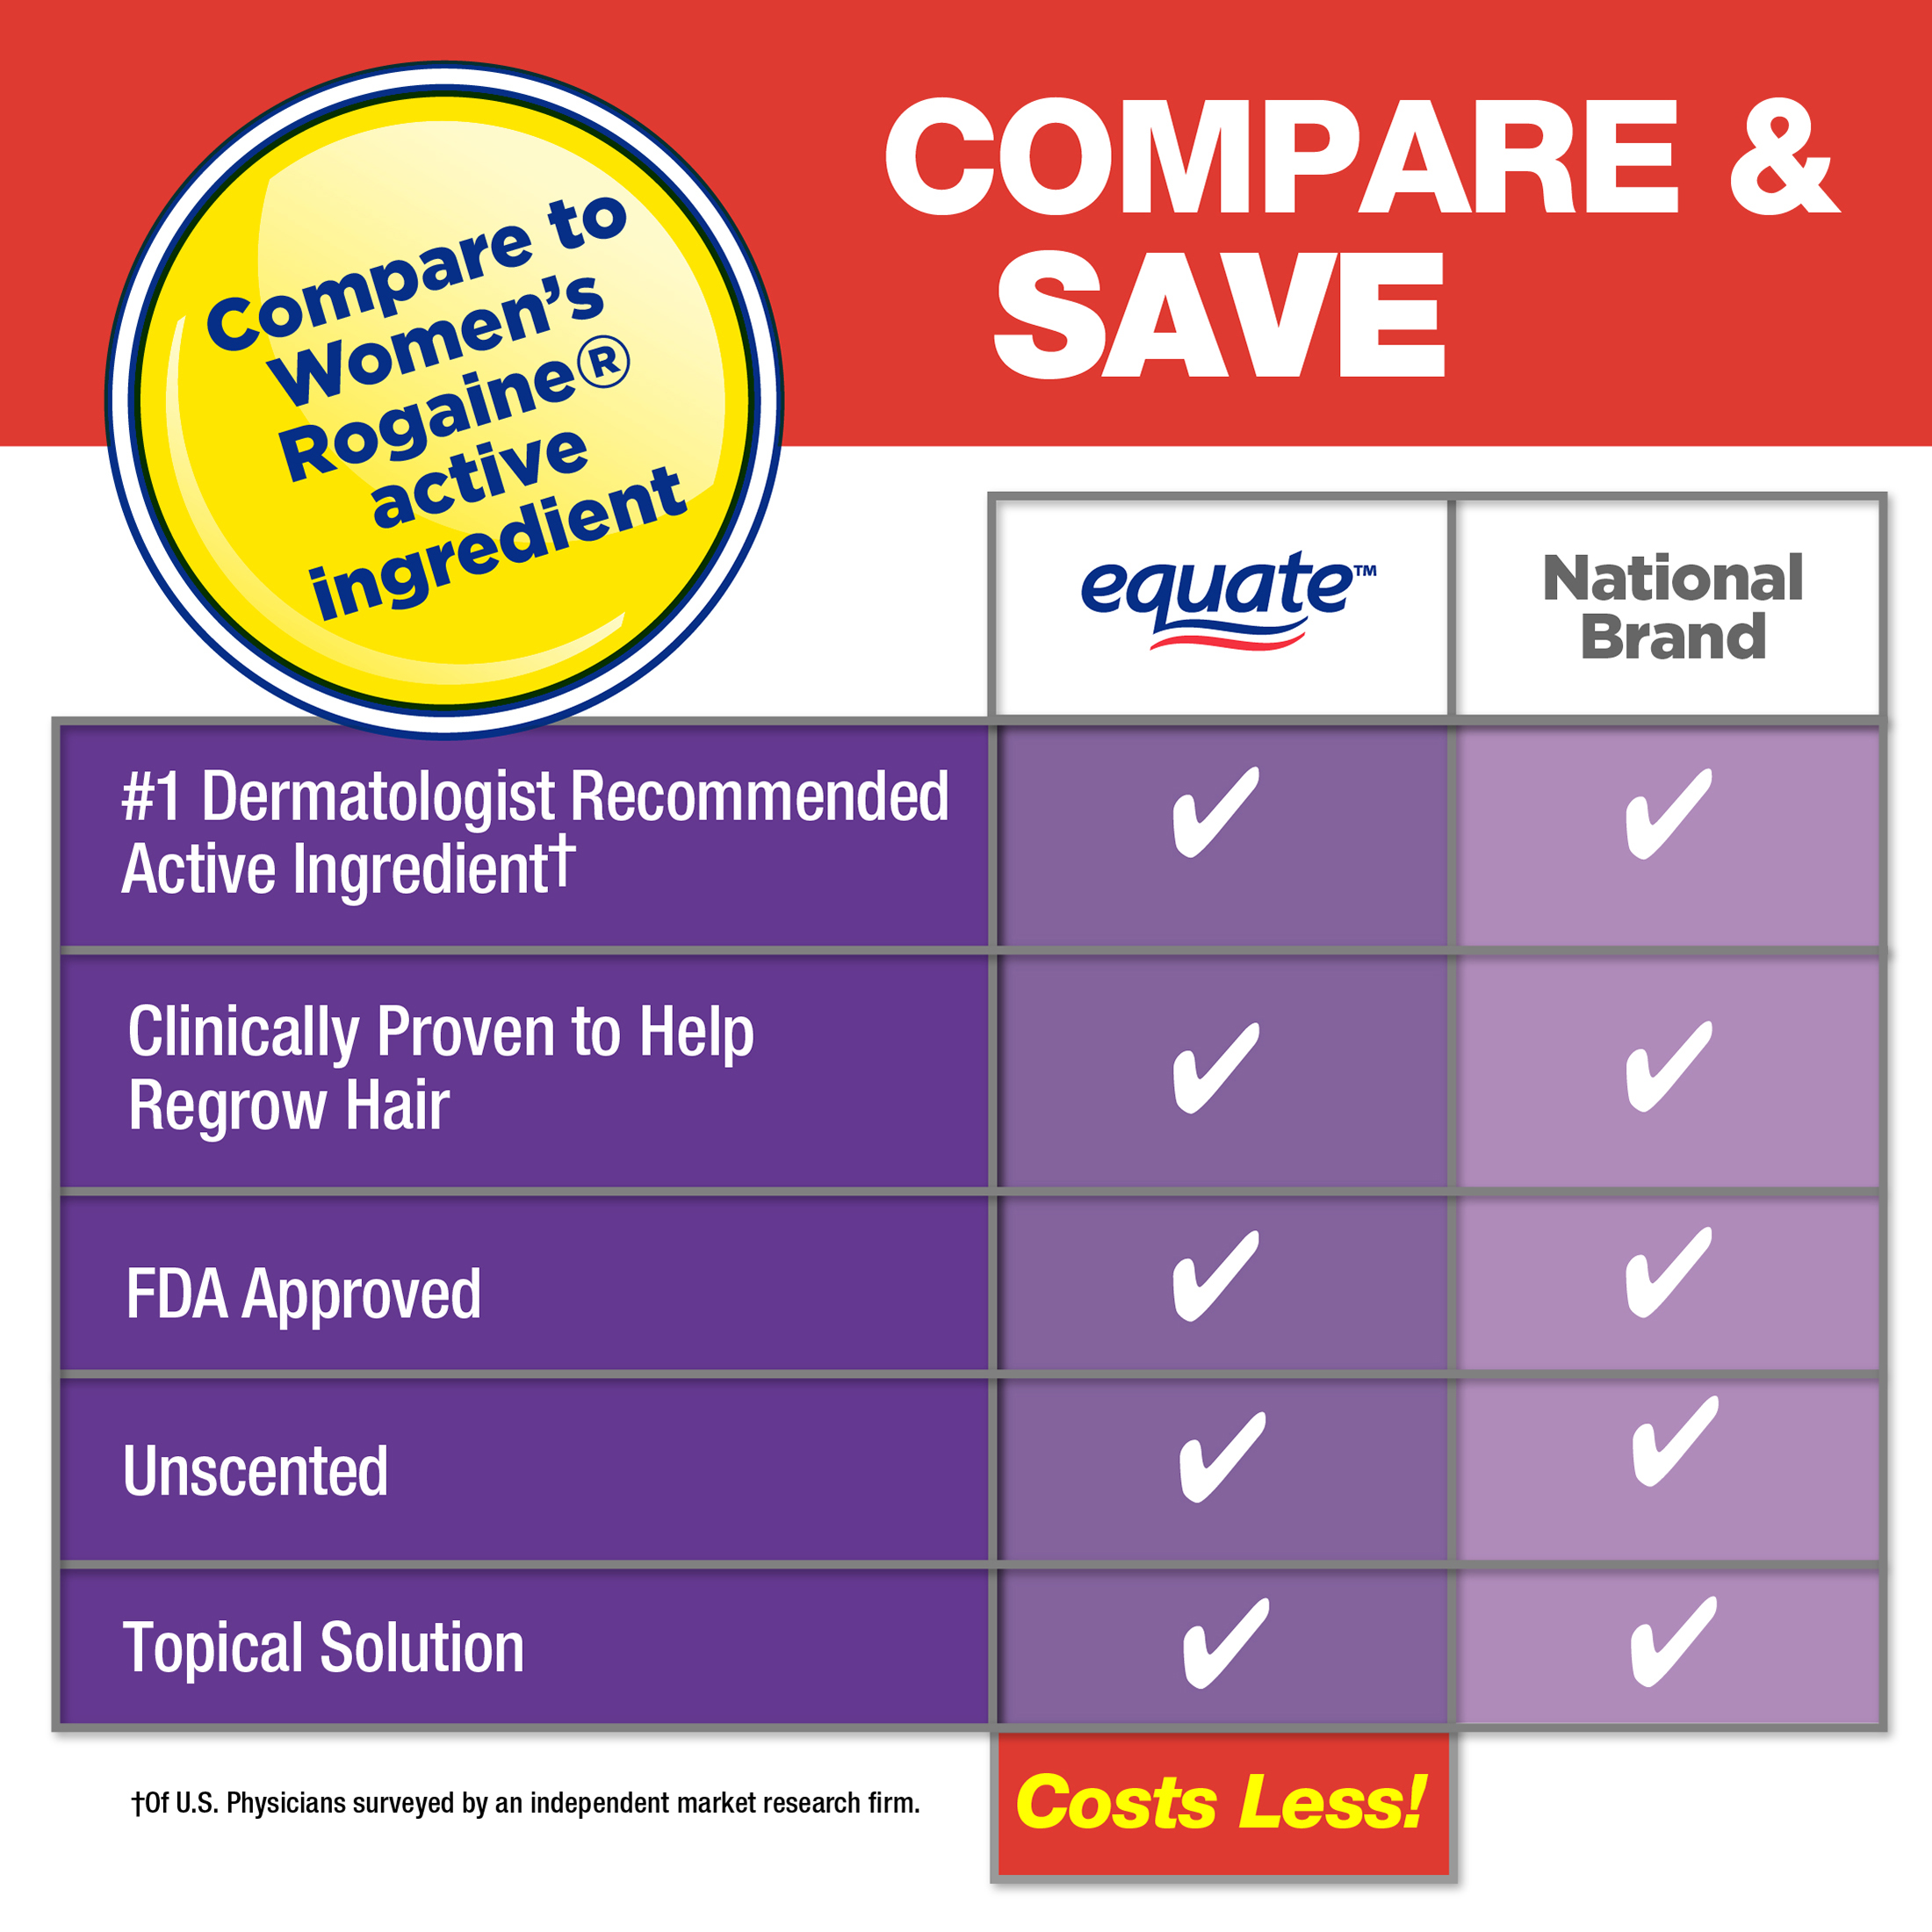 Equate Compare to Women's Rogaine Minoxidil Topical Solution 2%, 3-Month Hair Loss & Regrowth Treatment for Female, 6 Fl oz - image 5 of 7